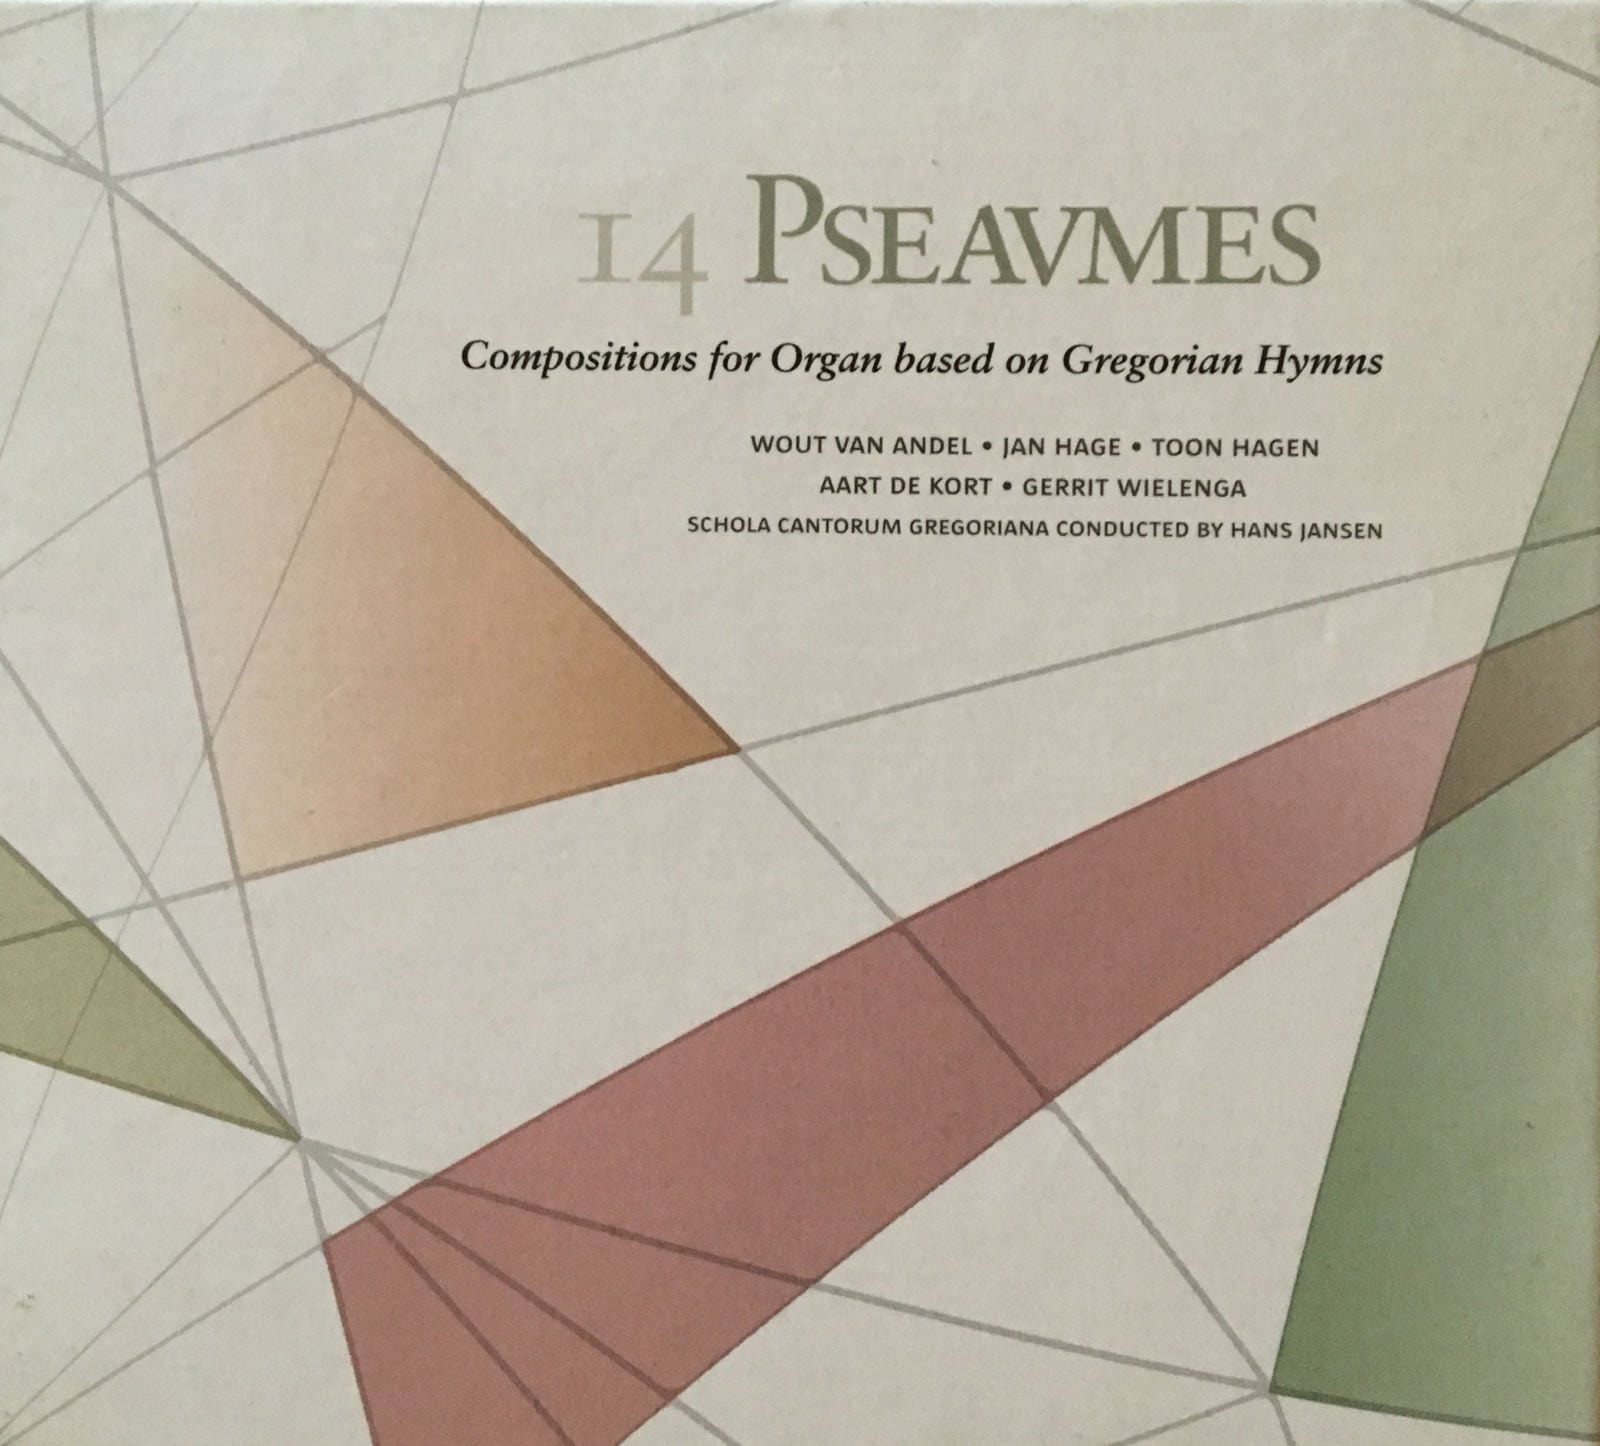 14 Pseaumes: Compositions for organ based on Gregorian Hymns